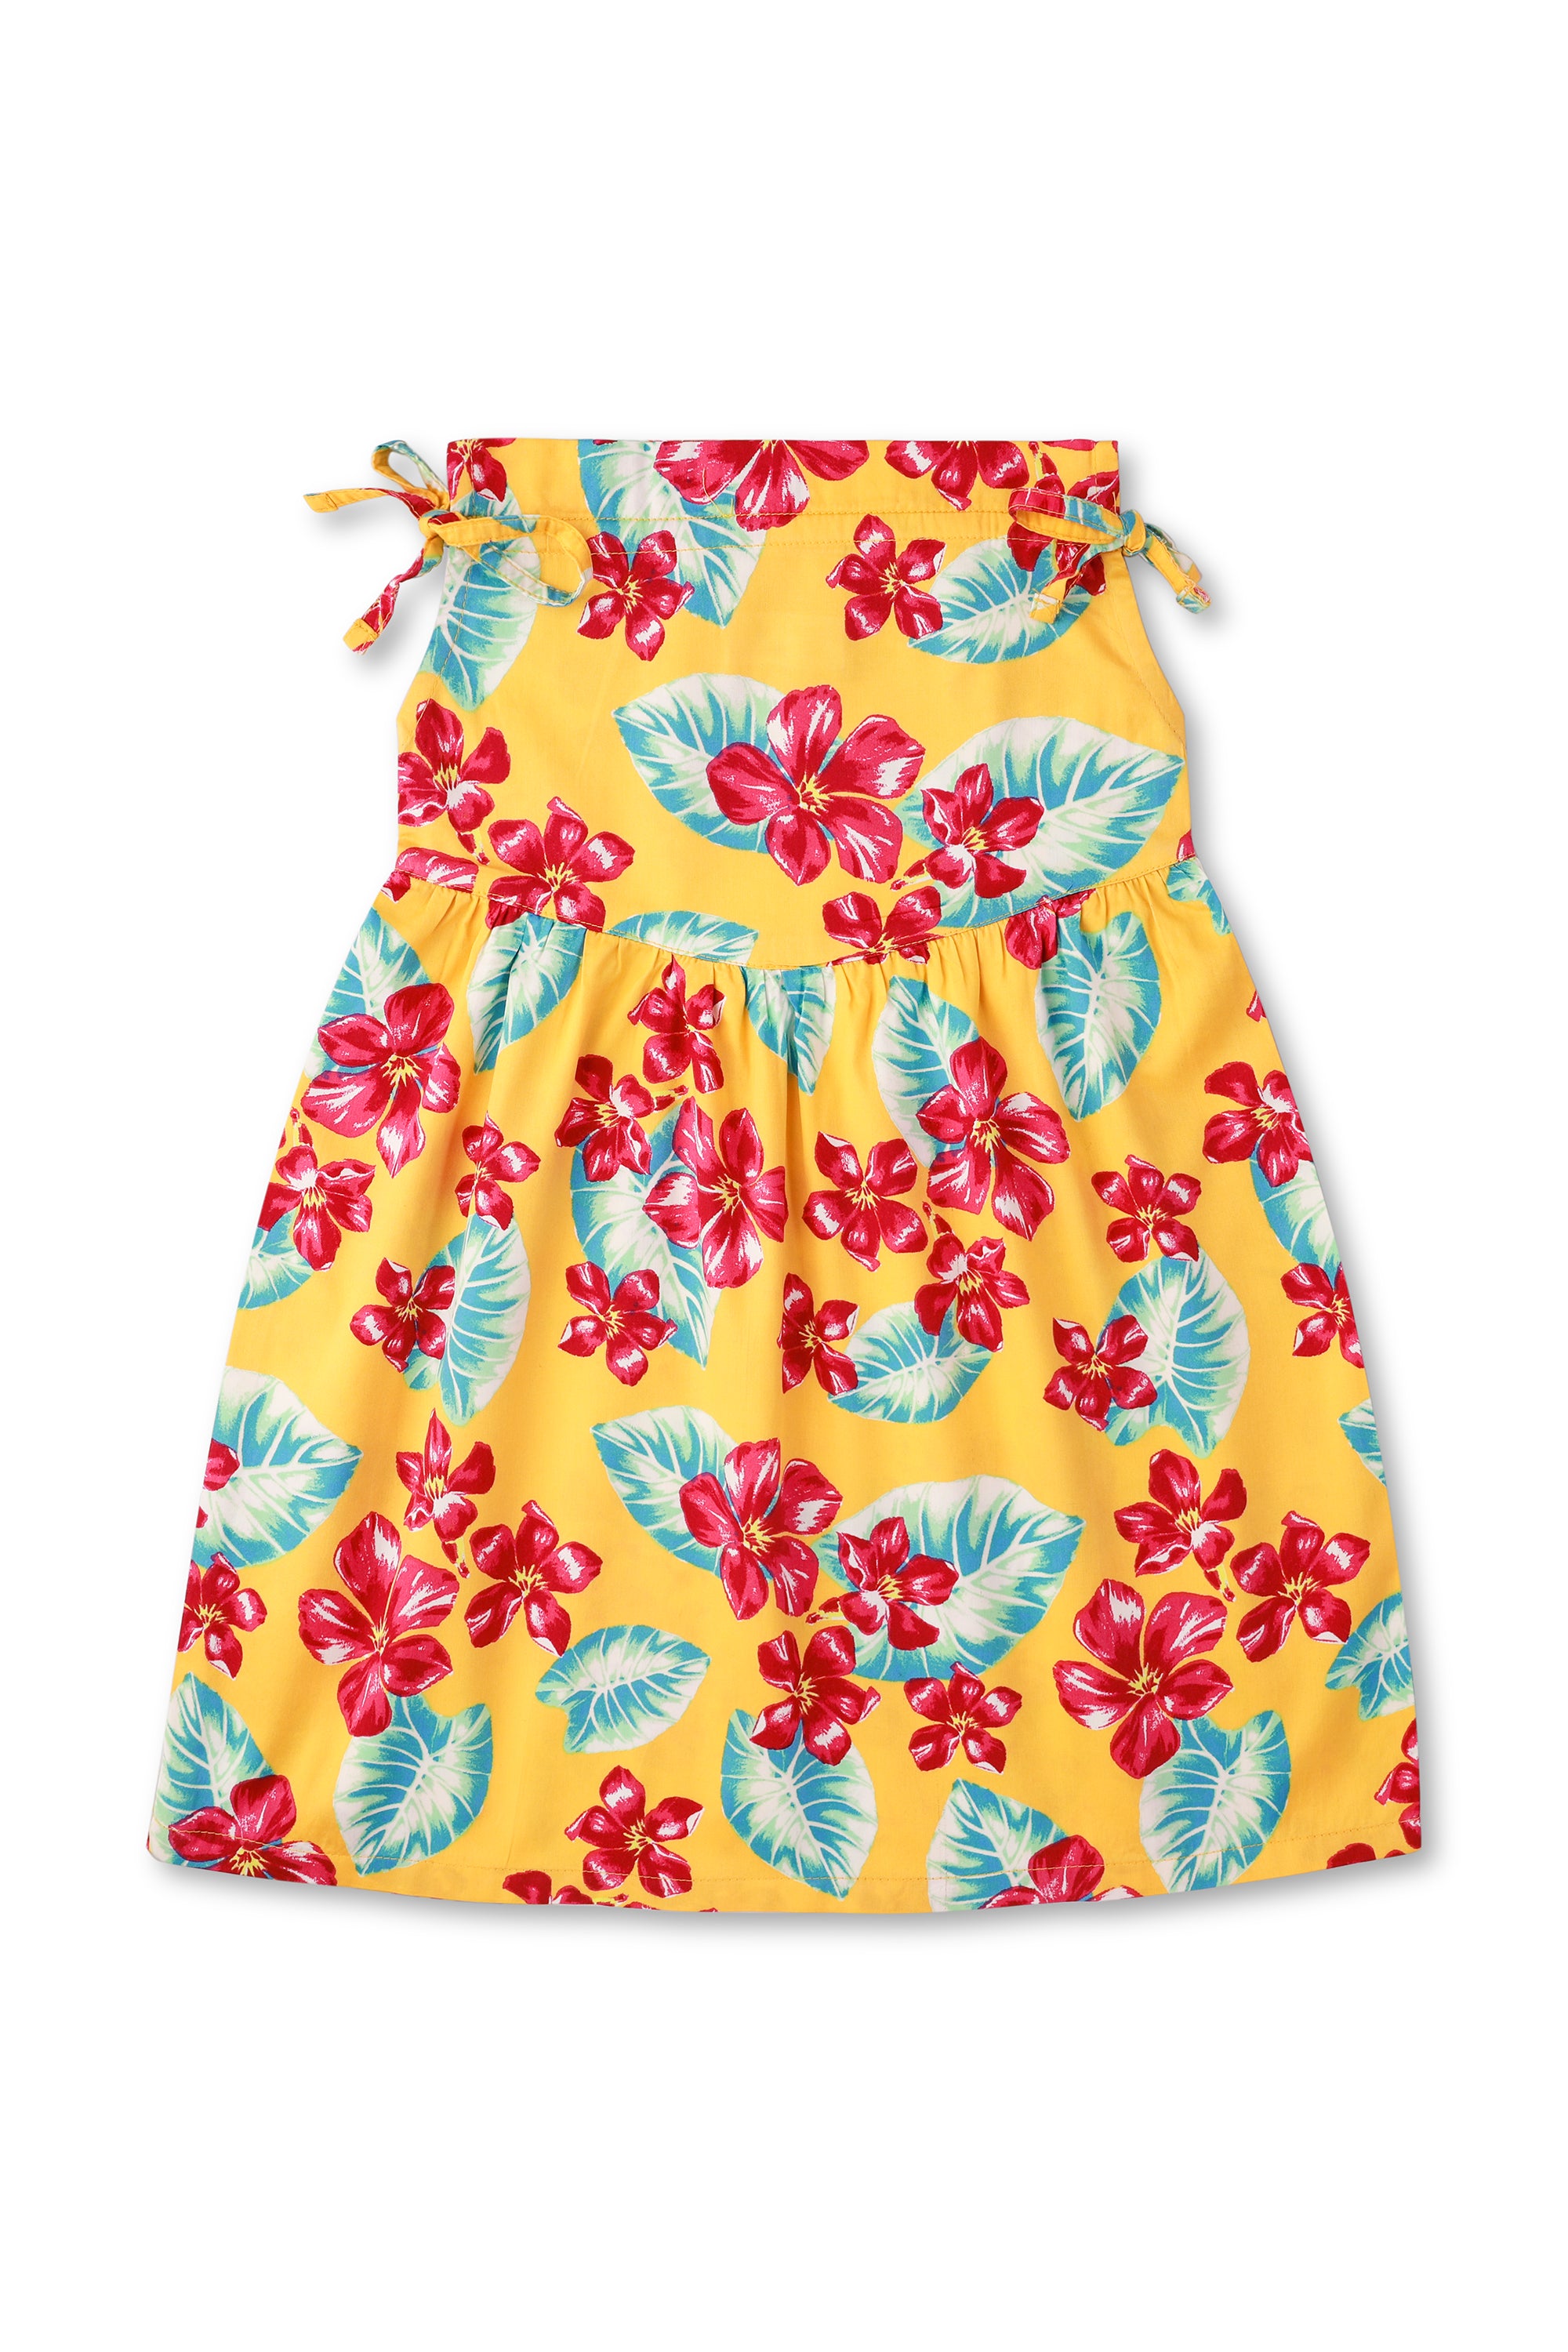 Floral Paradise Frock